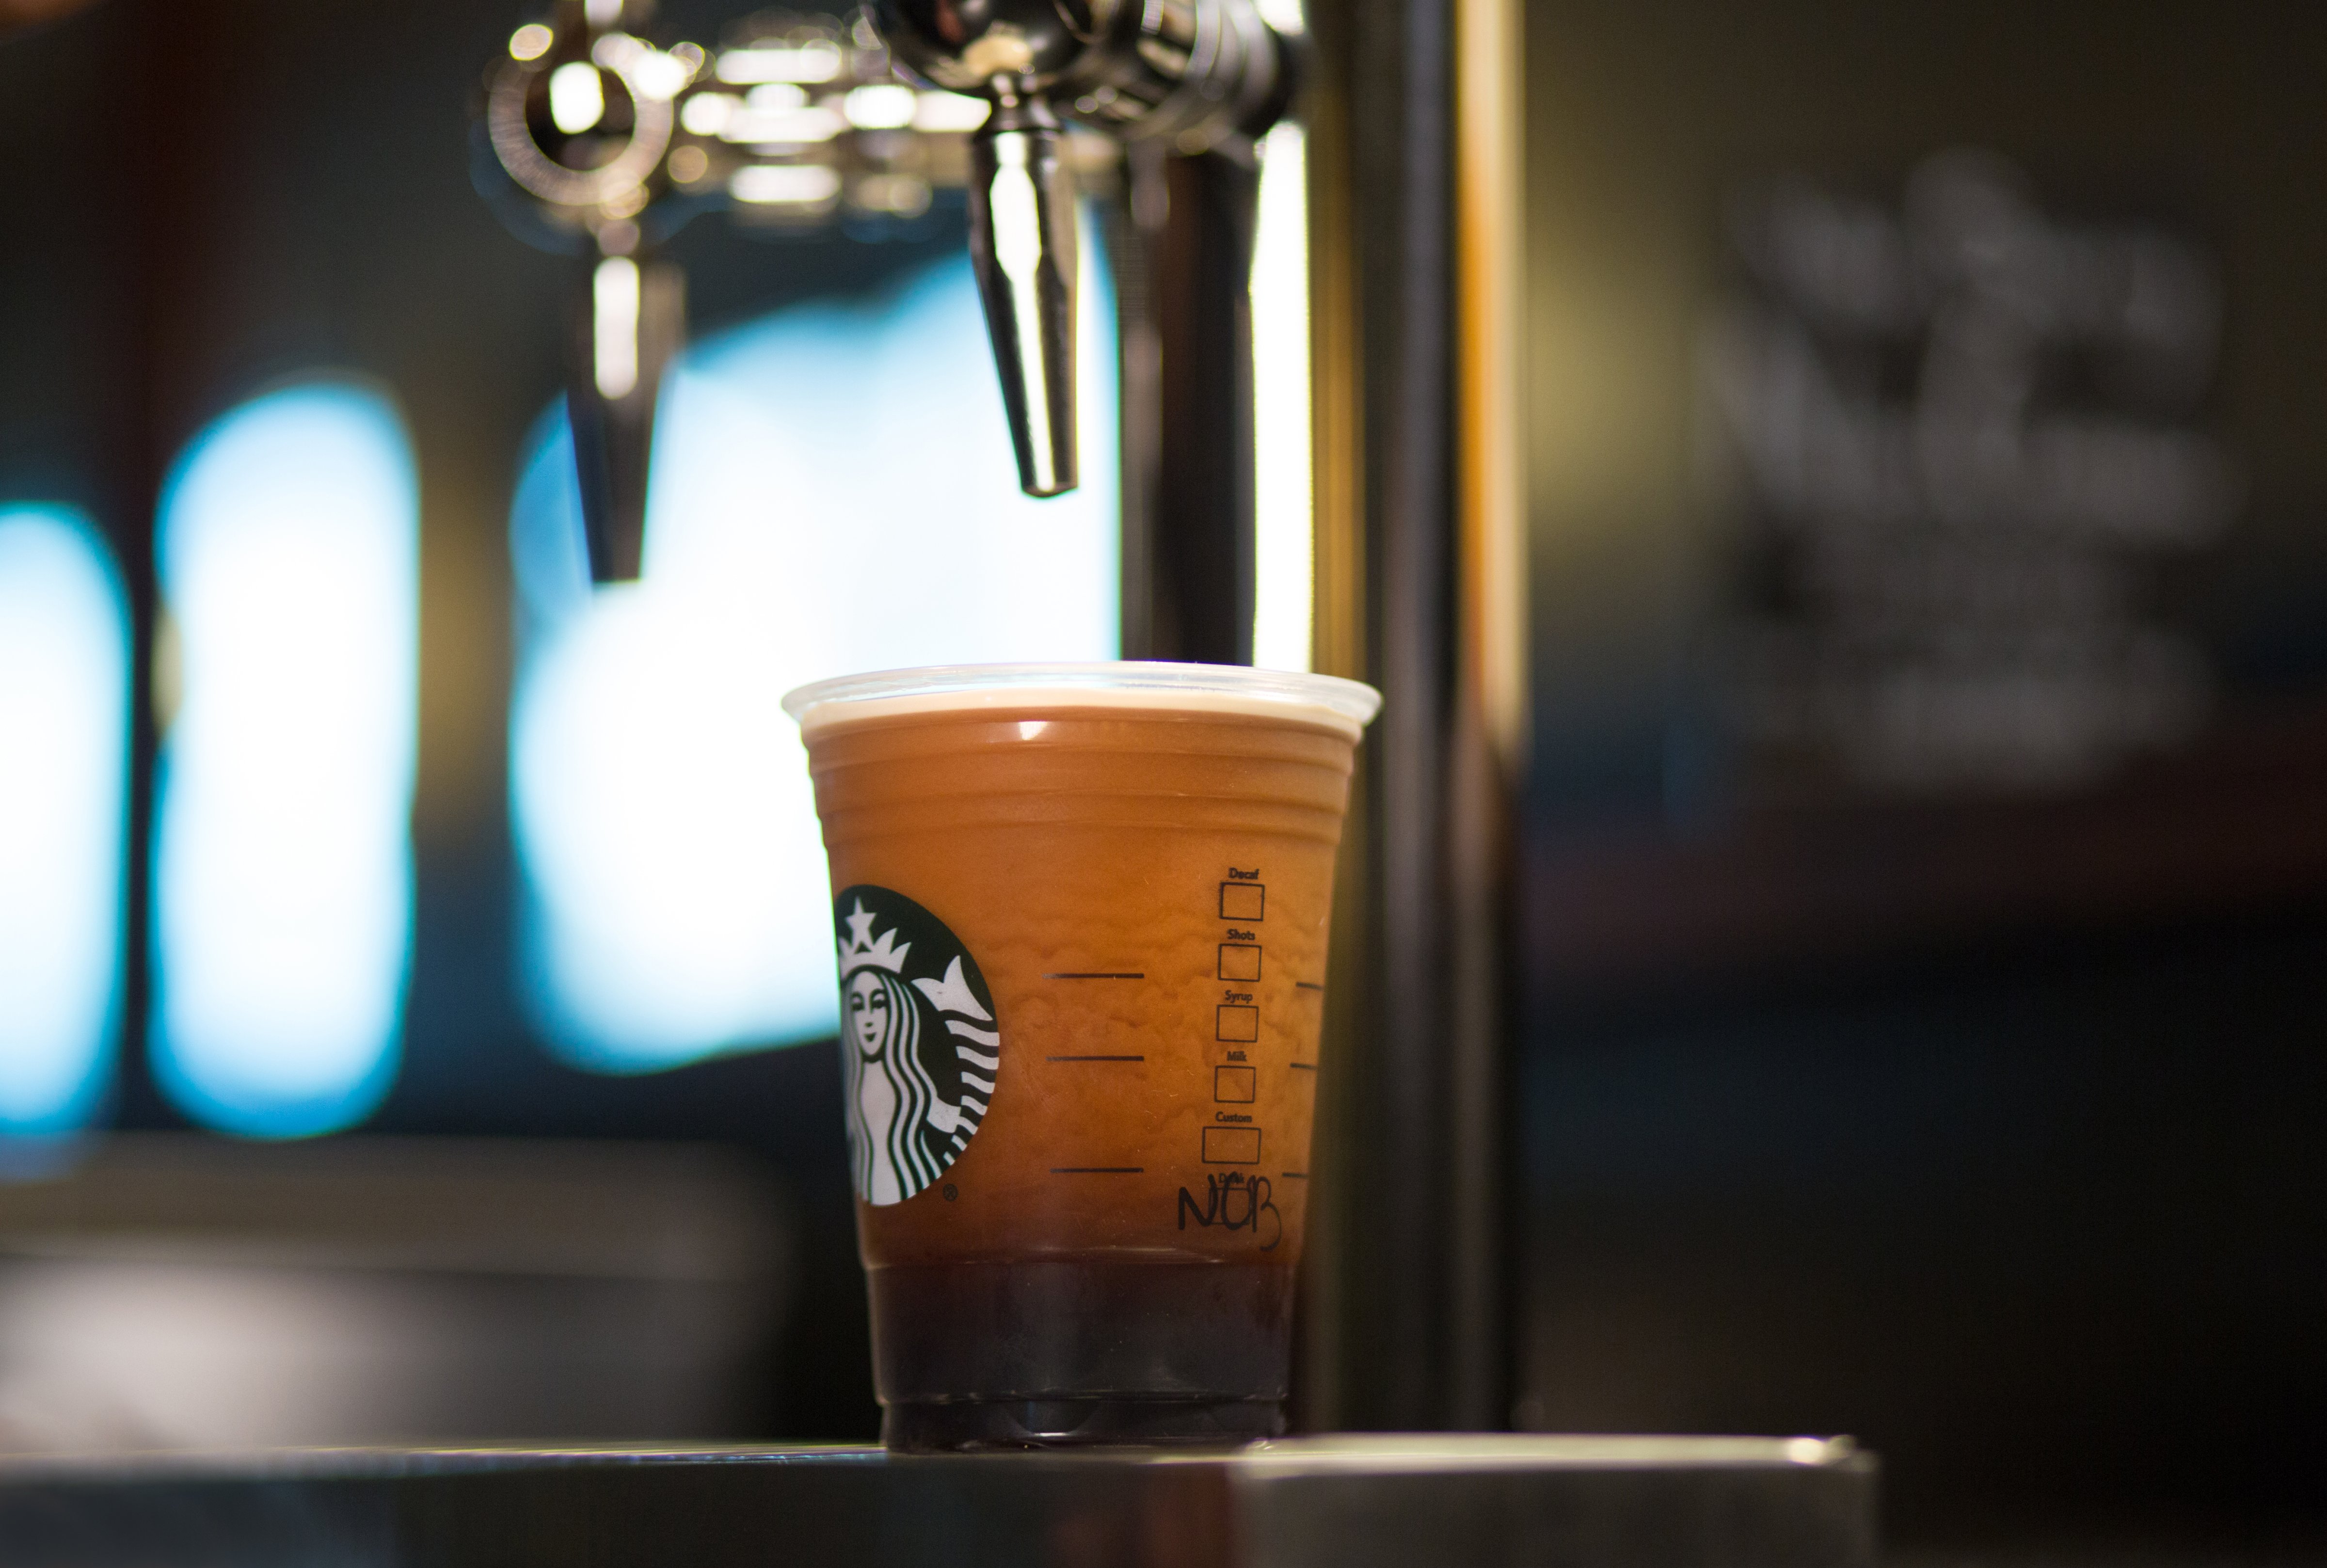 Starbucks Nitro Cold Brew photographed at the Olive Way Starbucks store in Seattle. Photographed on Tuesday, May 24, 2016. (Joshua Trujillo/Starbucks)